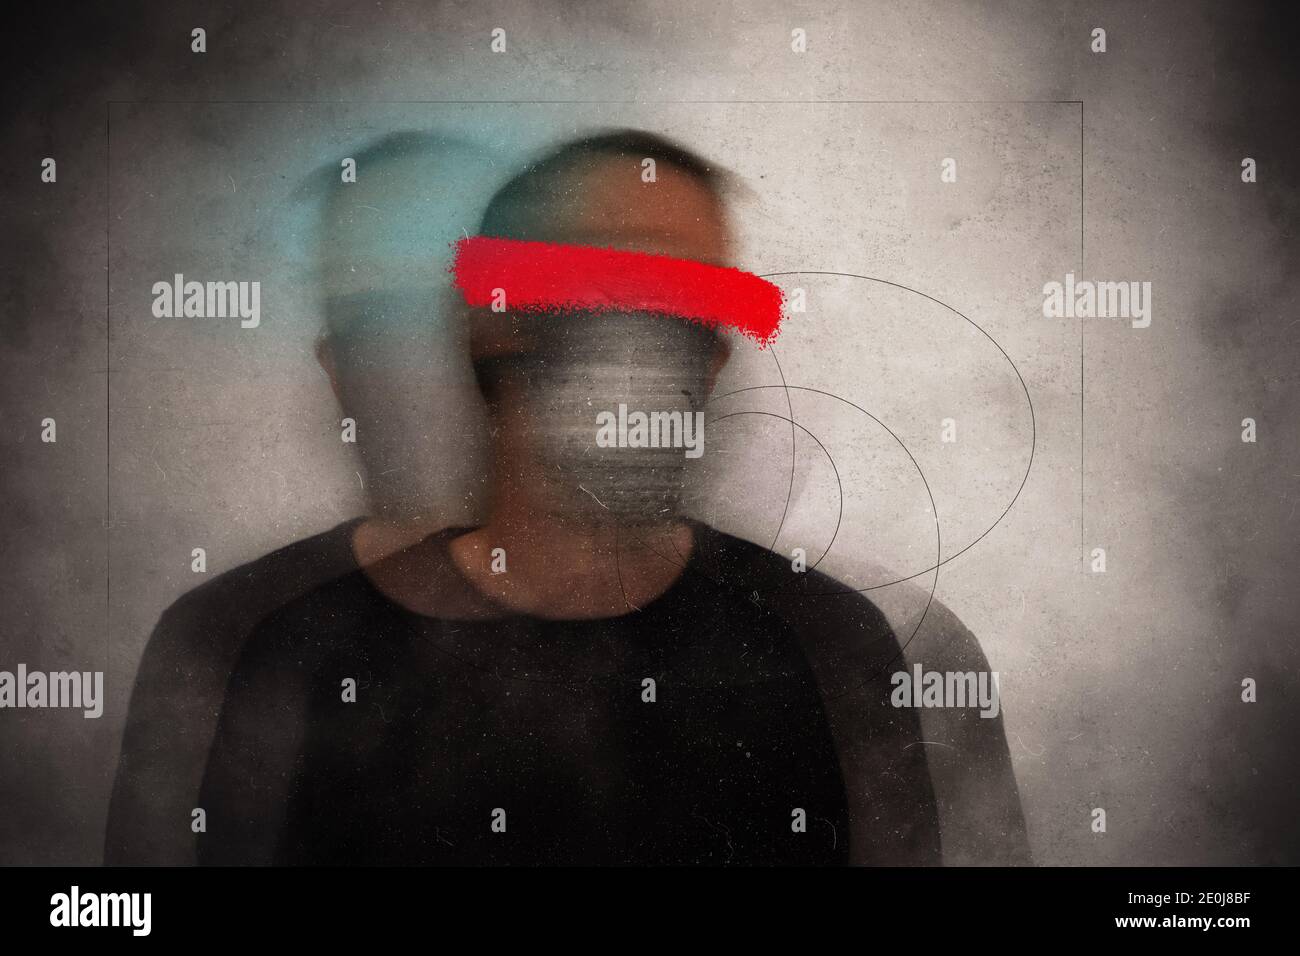 A mental health concept. A man with a blurred head with his eyes covered. With a grunge, abstract edit Stock Photo